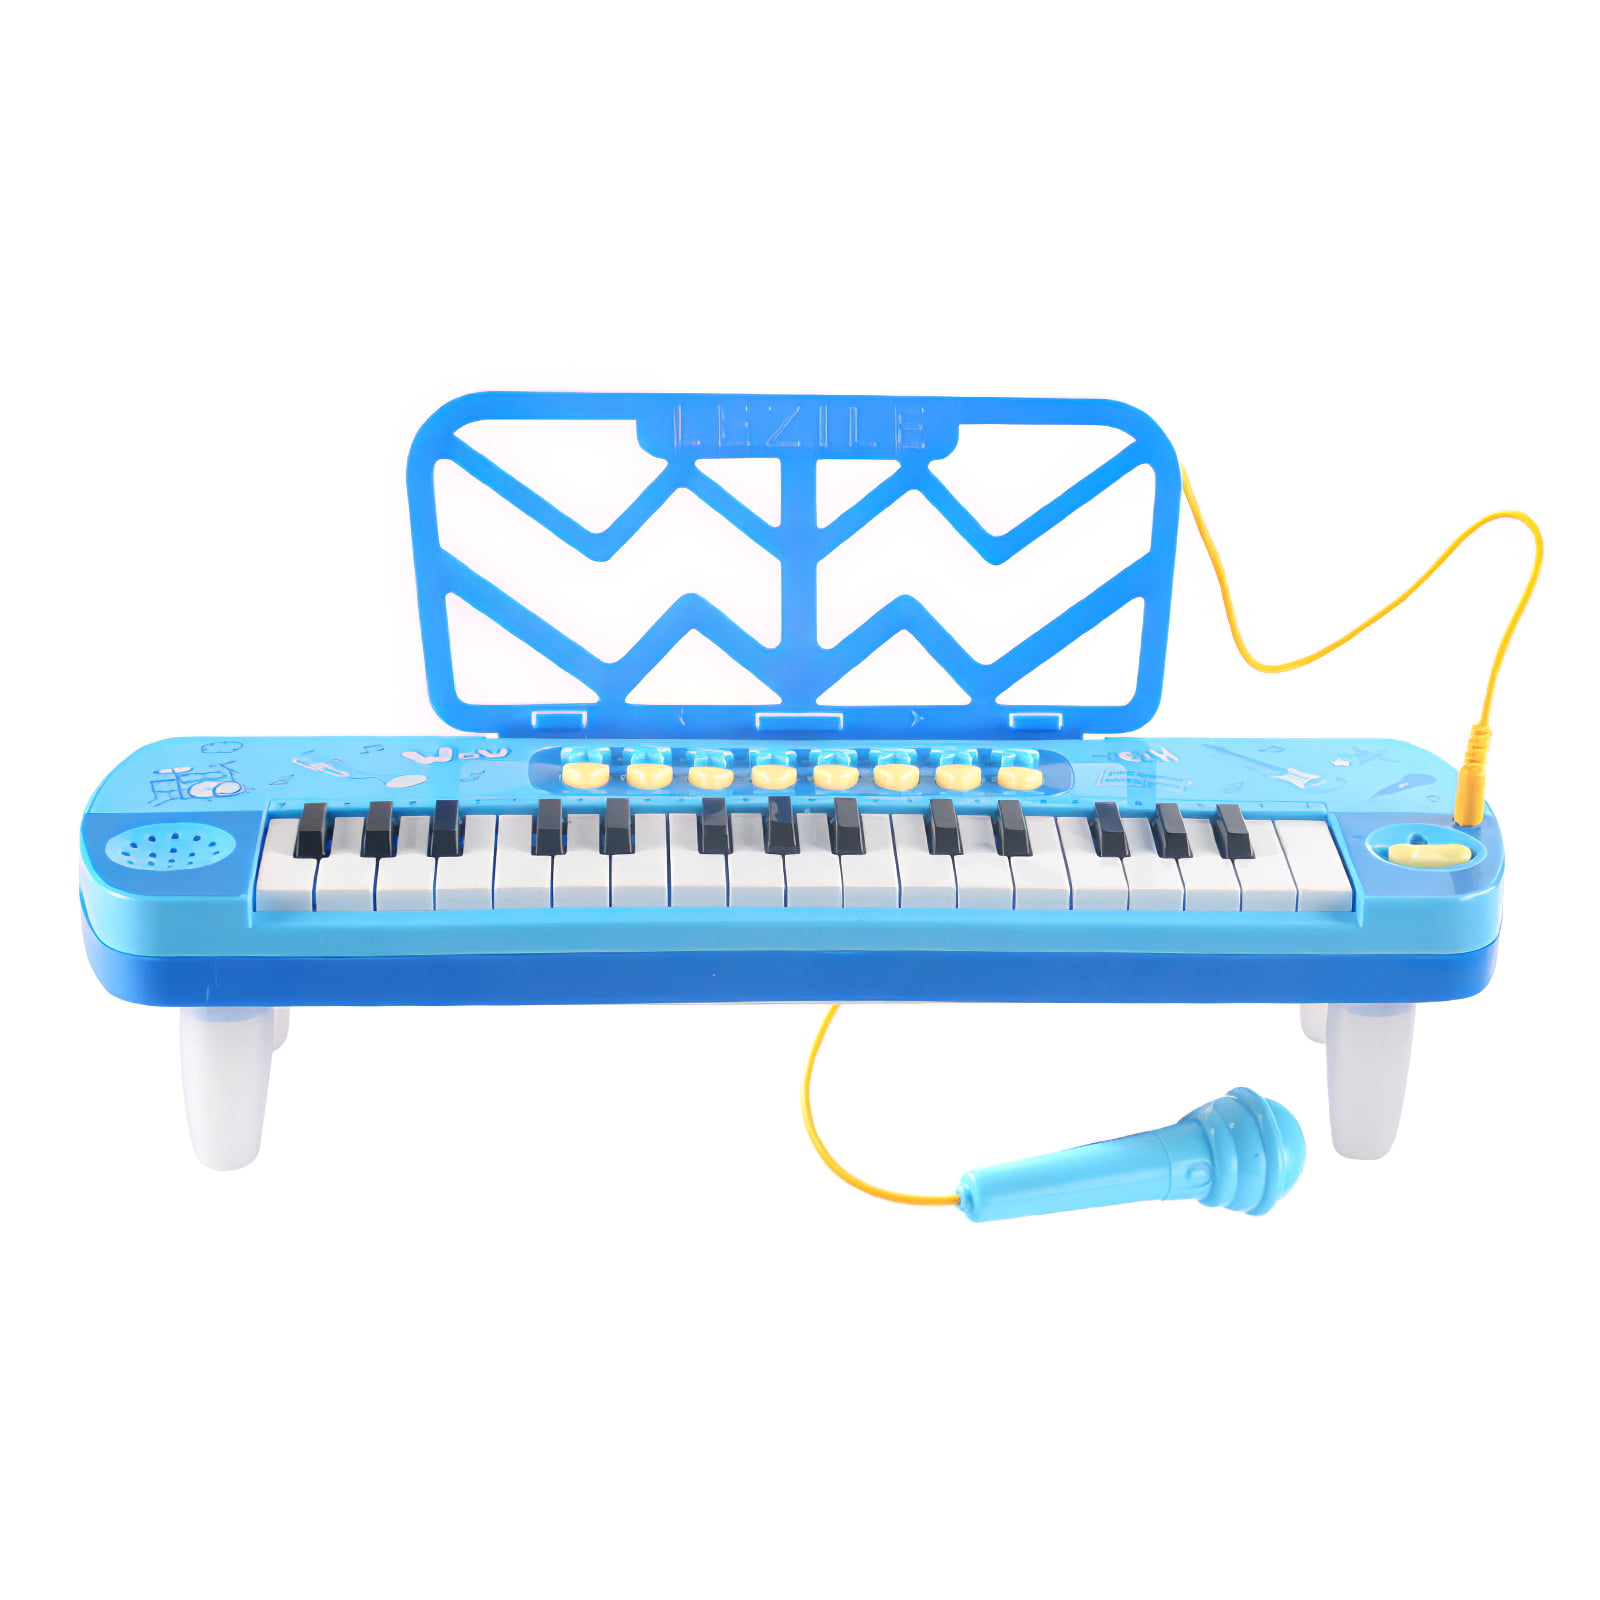 Details about    Kids Piano Multifunction Music Educational Instrument Toy Keyboard Purple 